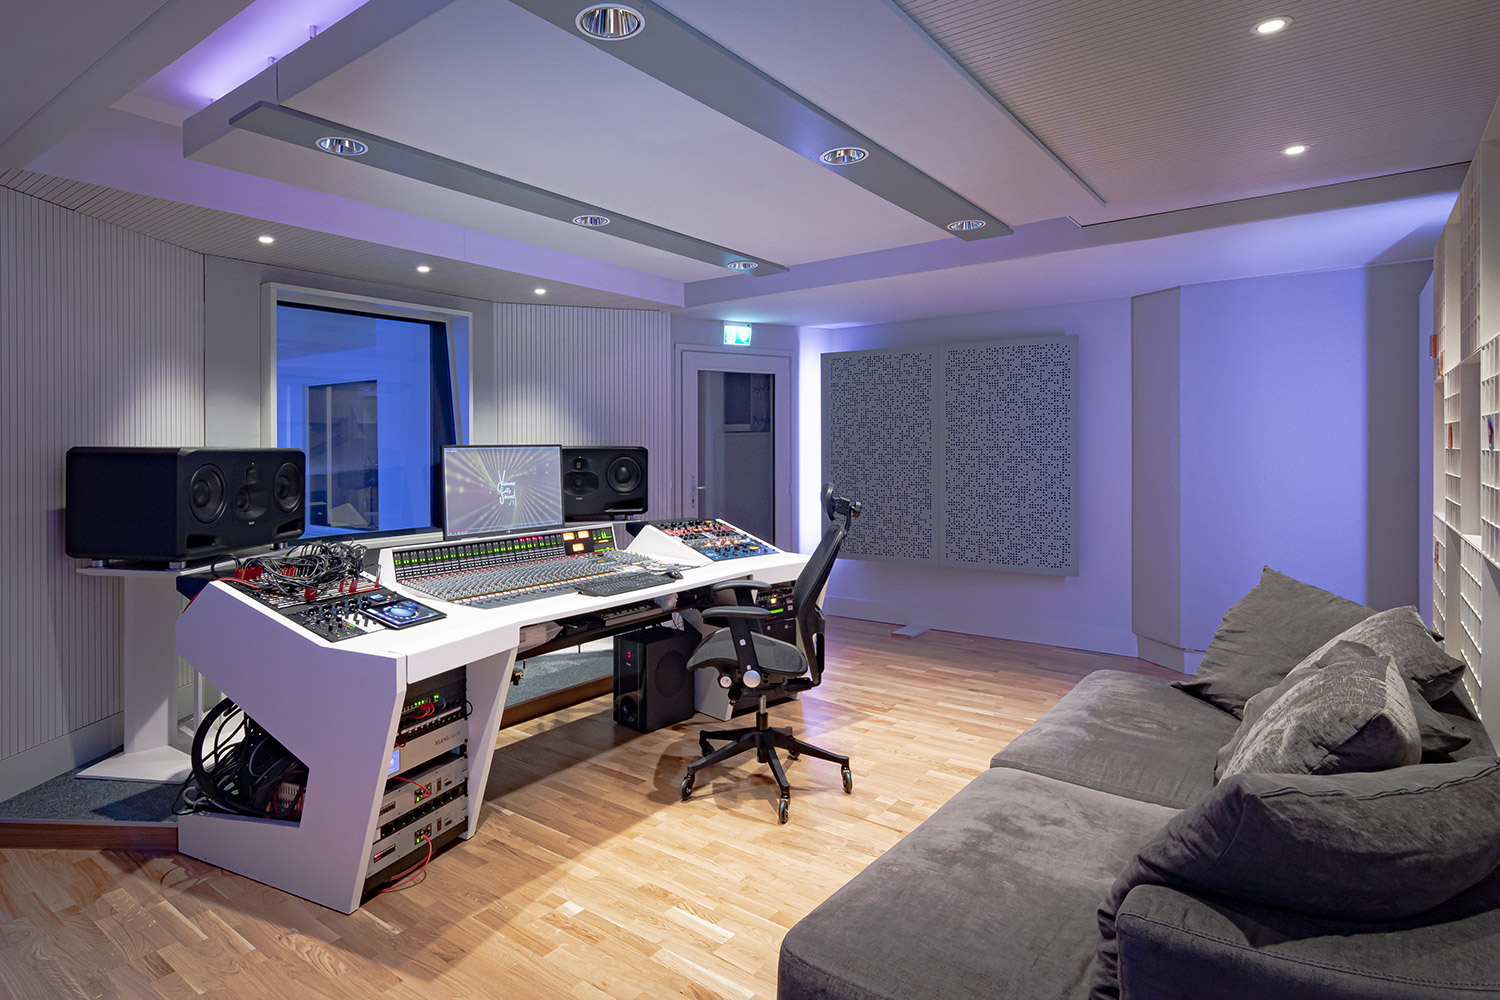 Vienna City Sound amazing control room designed by WSDG in Europe. Photo Dirk Noy.